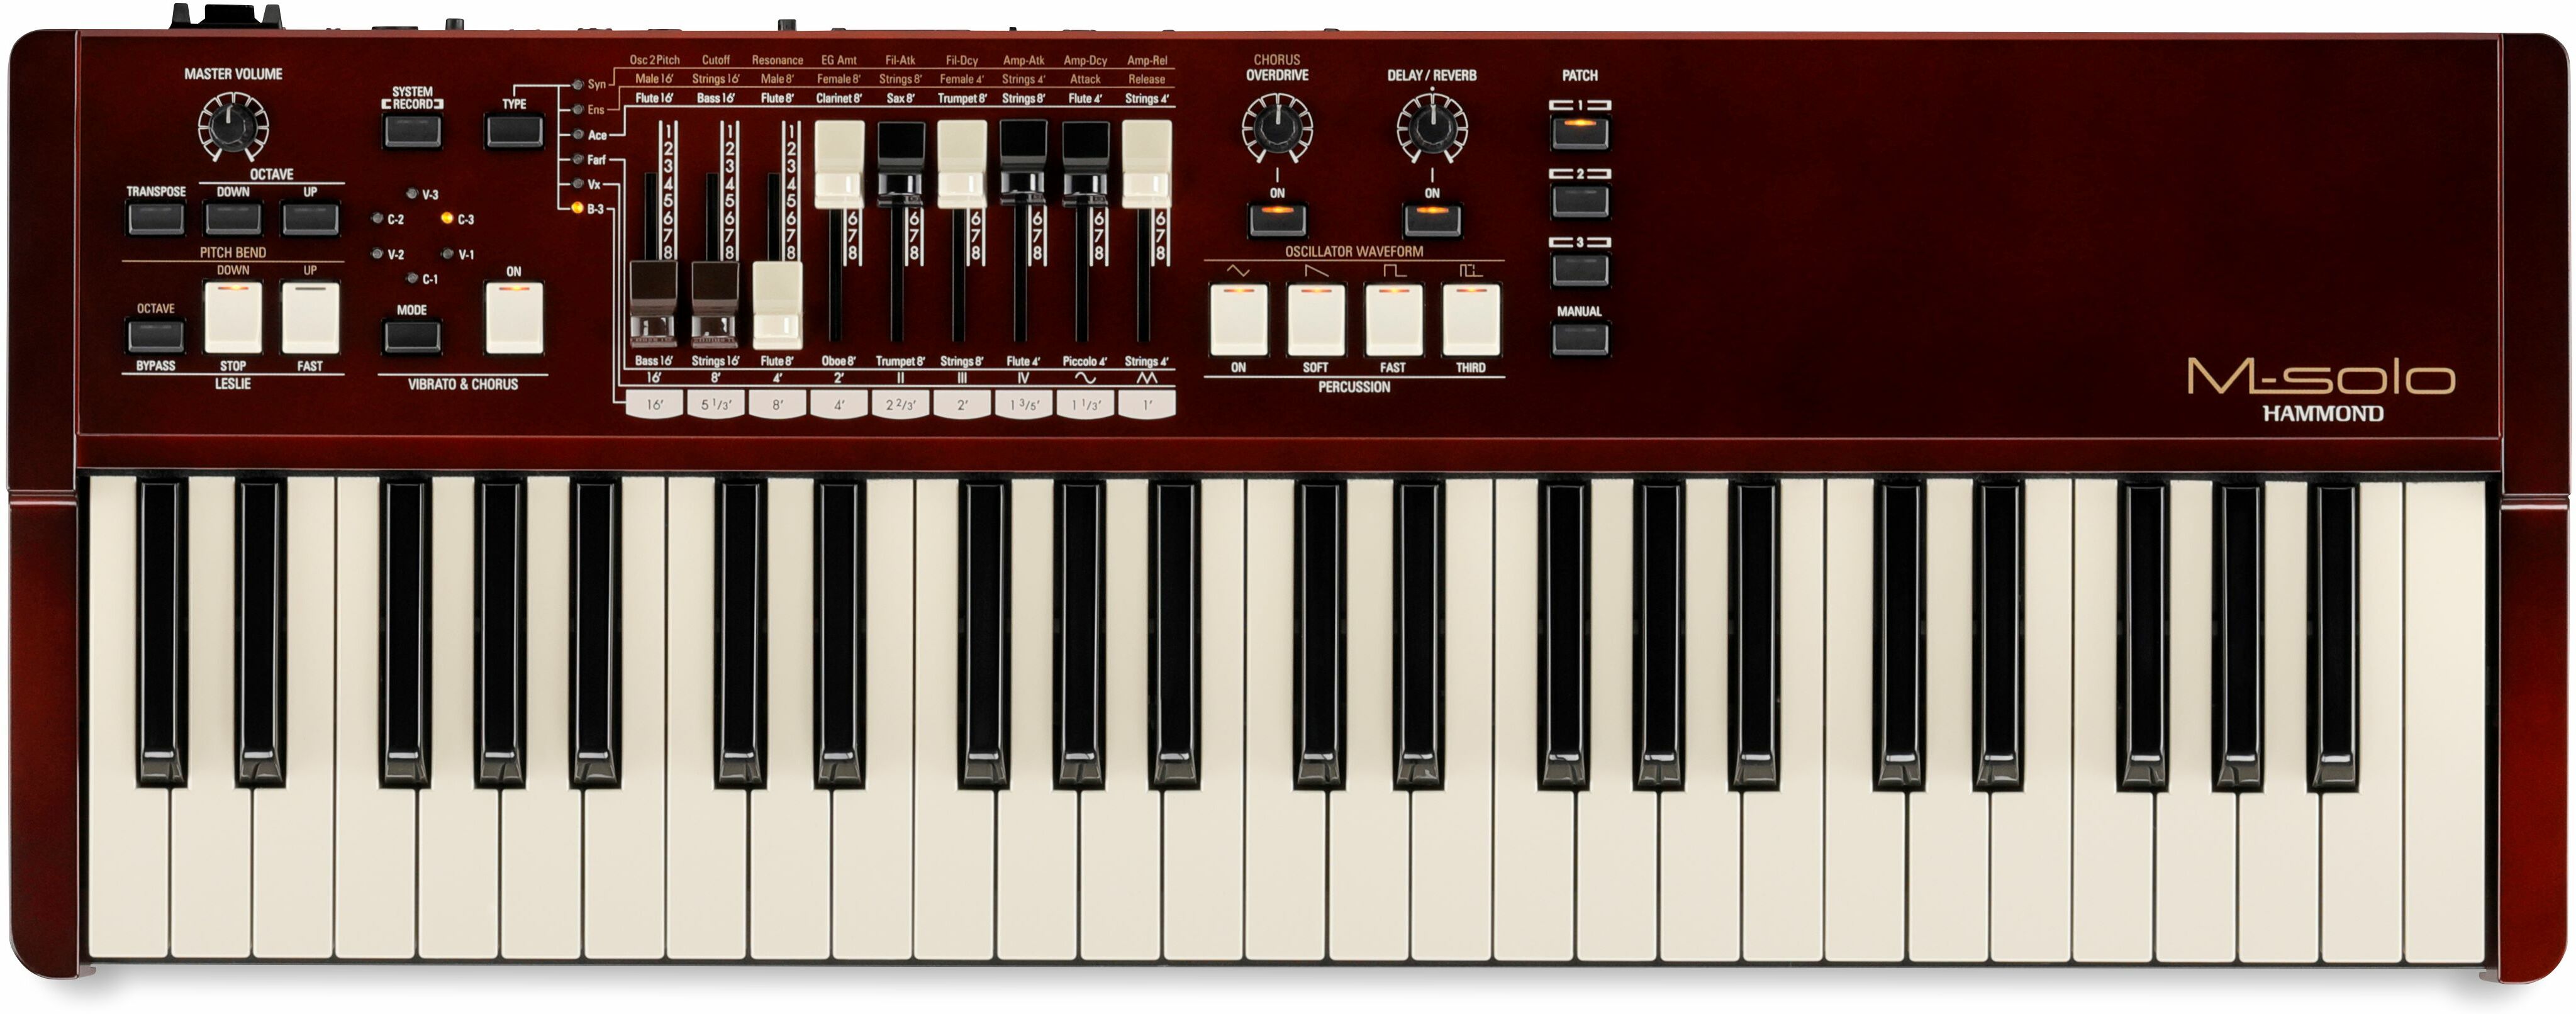 Hammond M-solo Burgundy - Synthesizer - Main picture